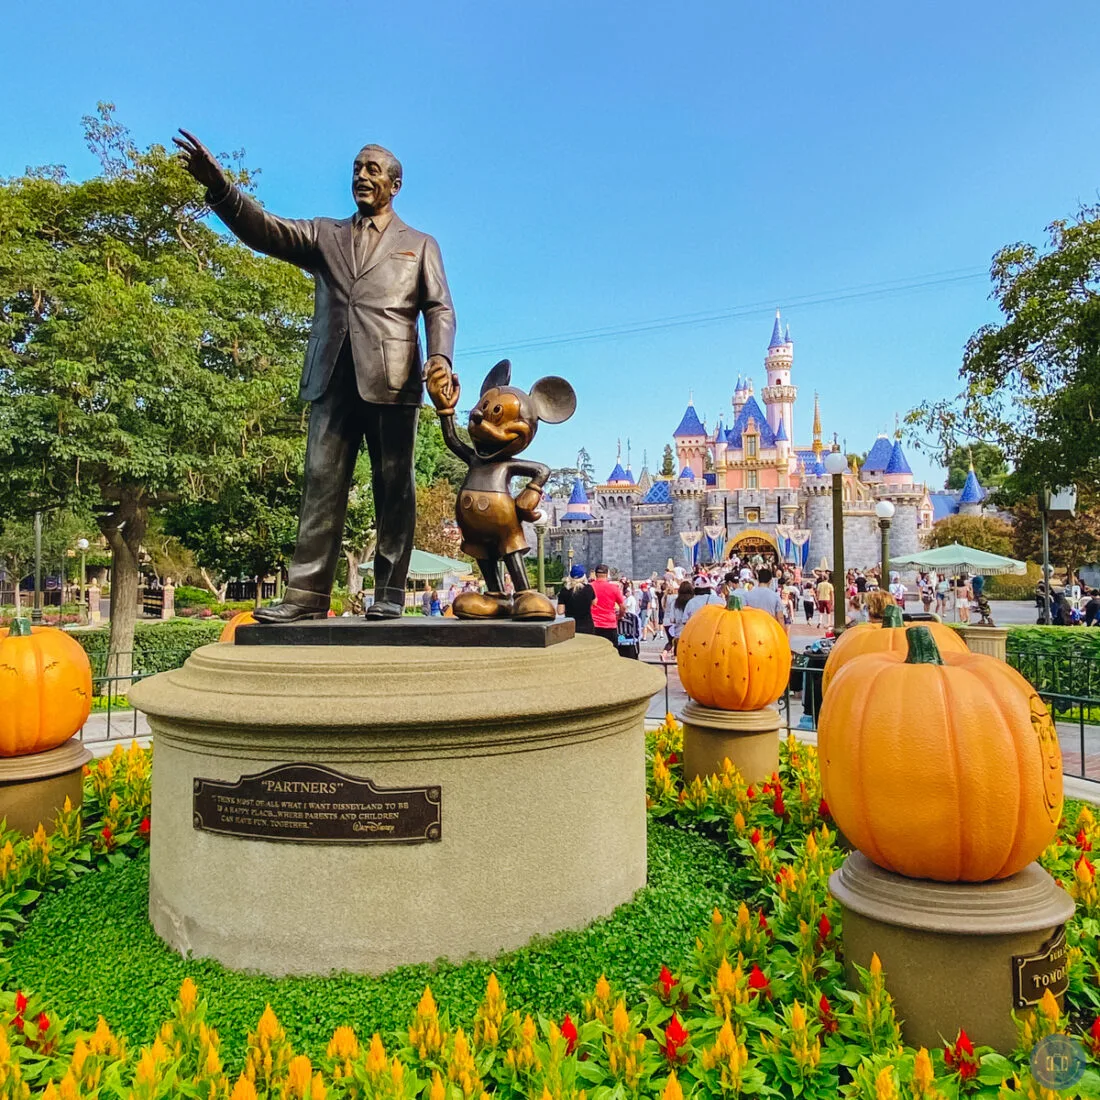 partners statue at disneyland with pumpkins and castle